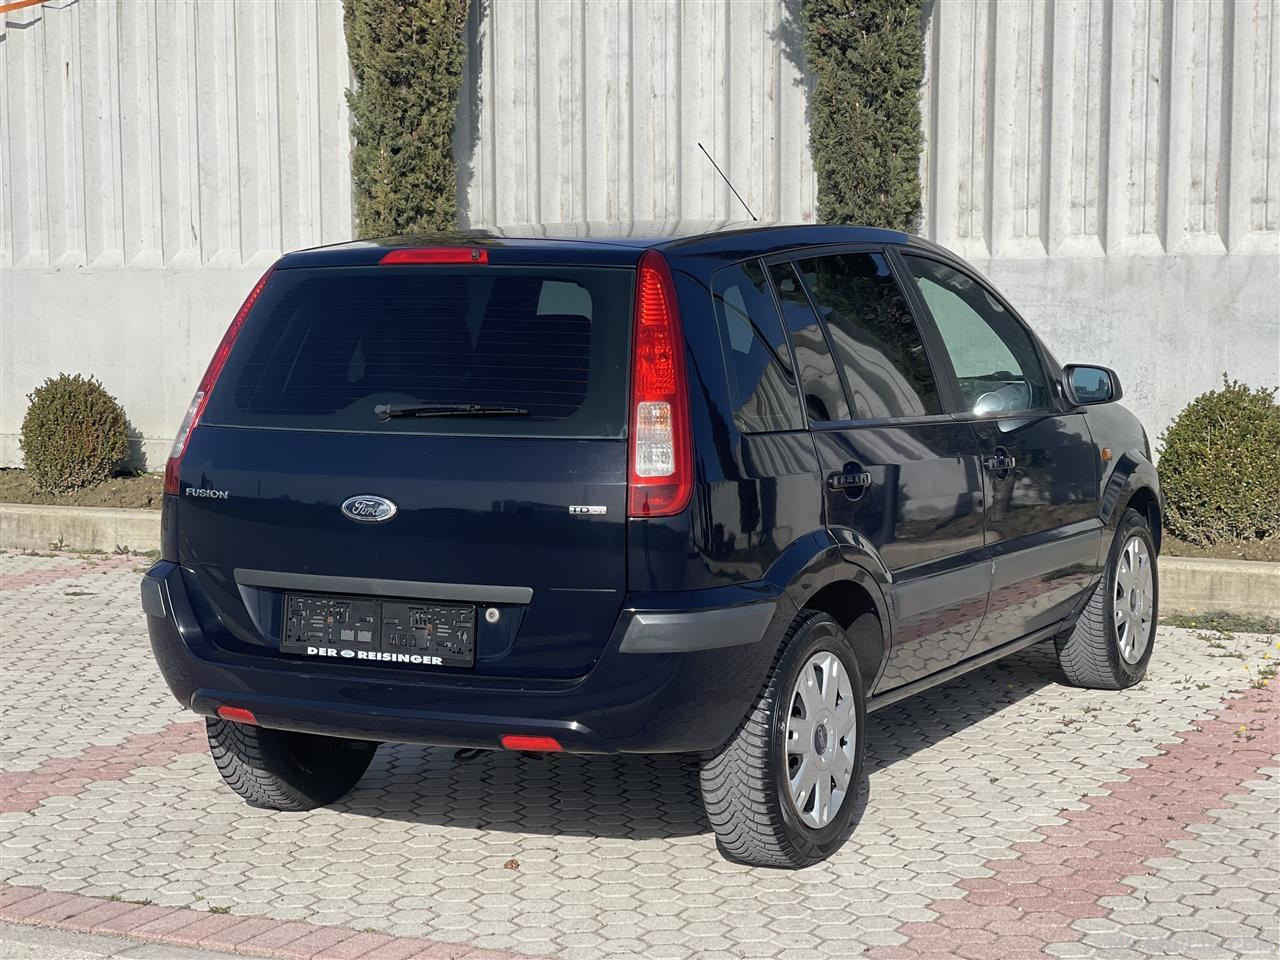 Ford Fusion 1.4 Naft 